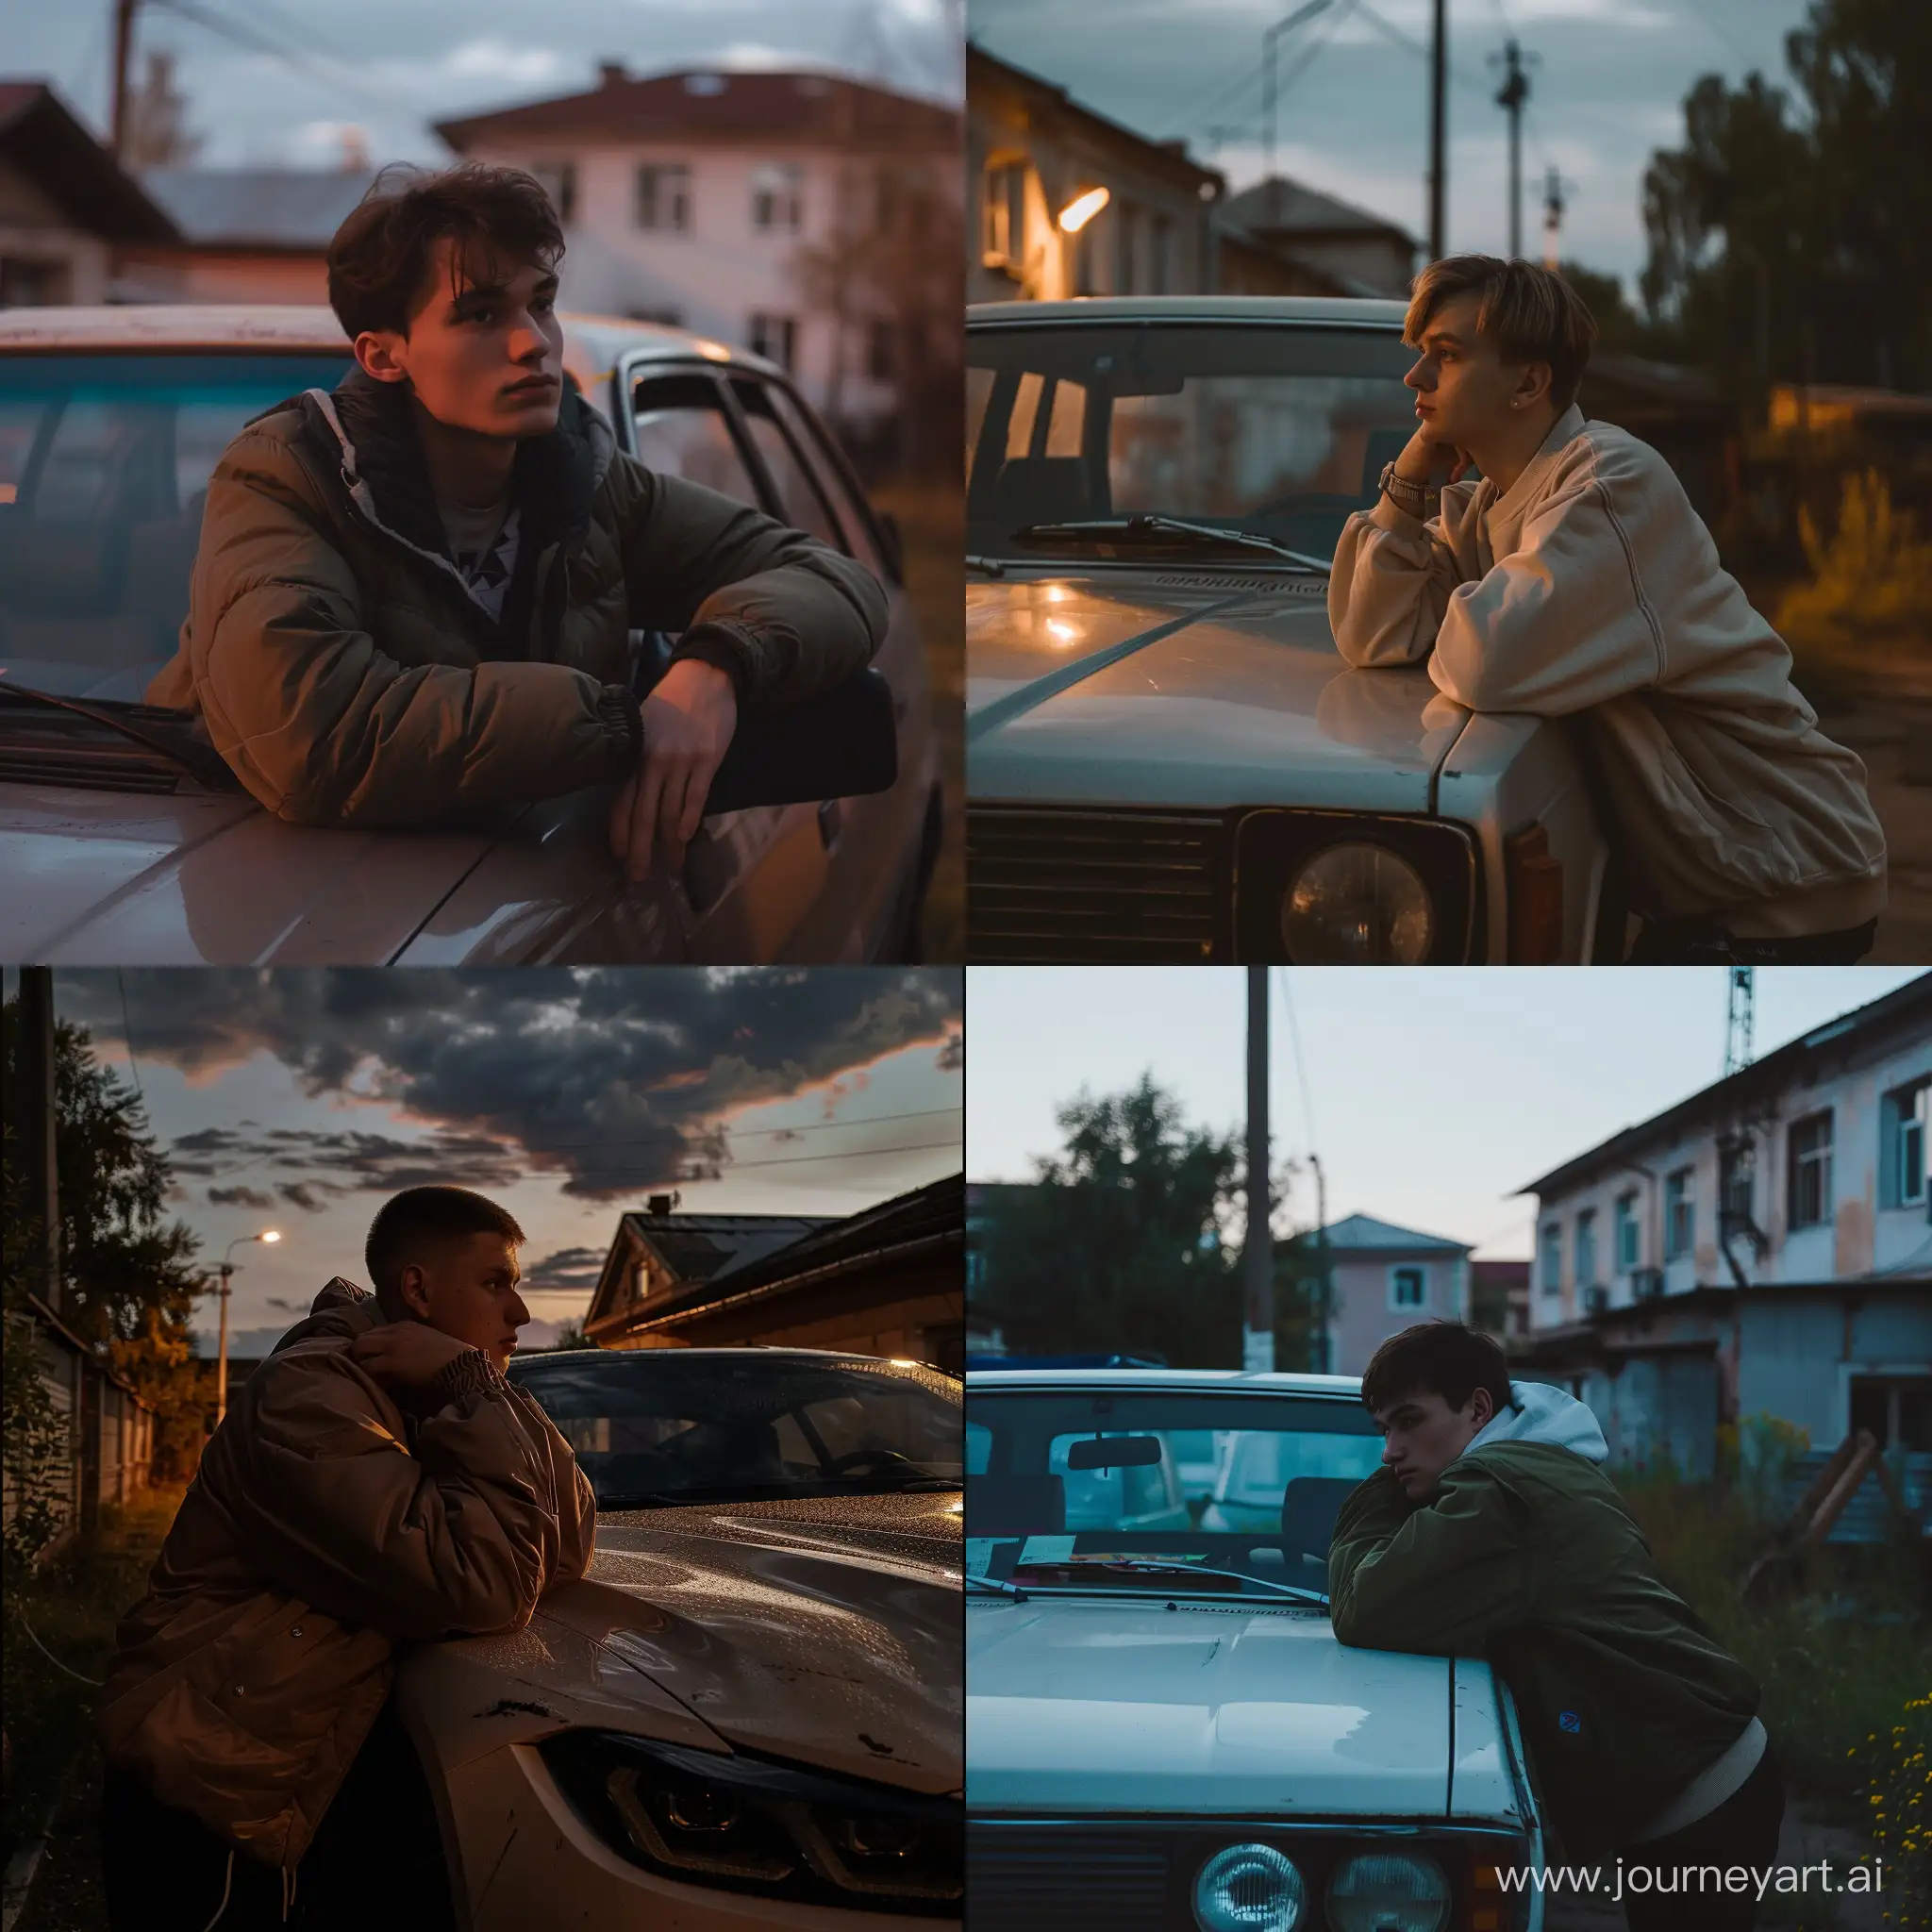 Young-Slavic-Man-Leaning-on-Car-in-Evening